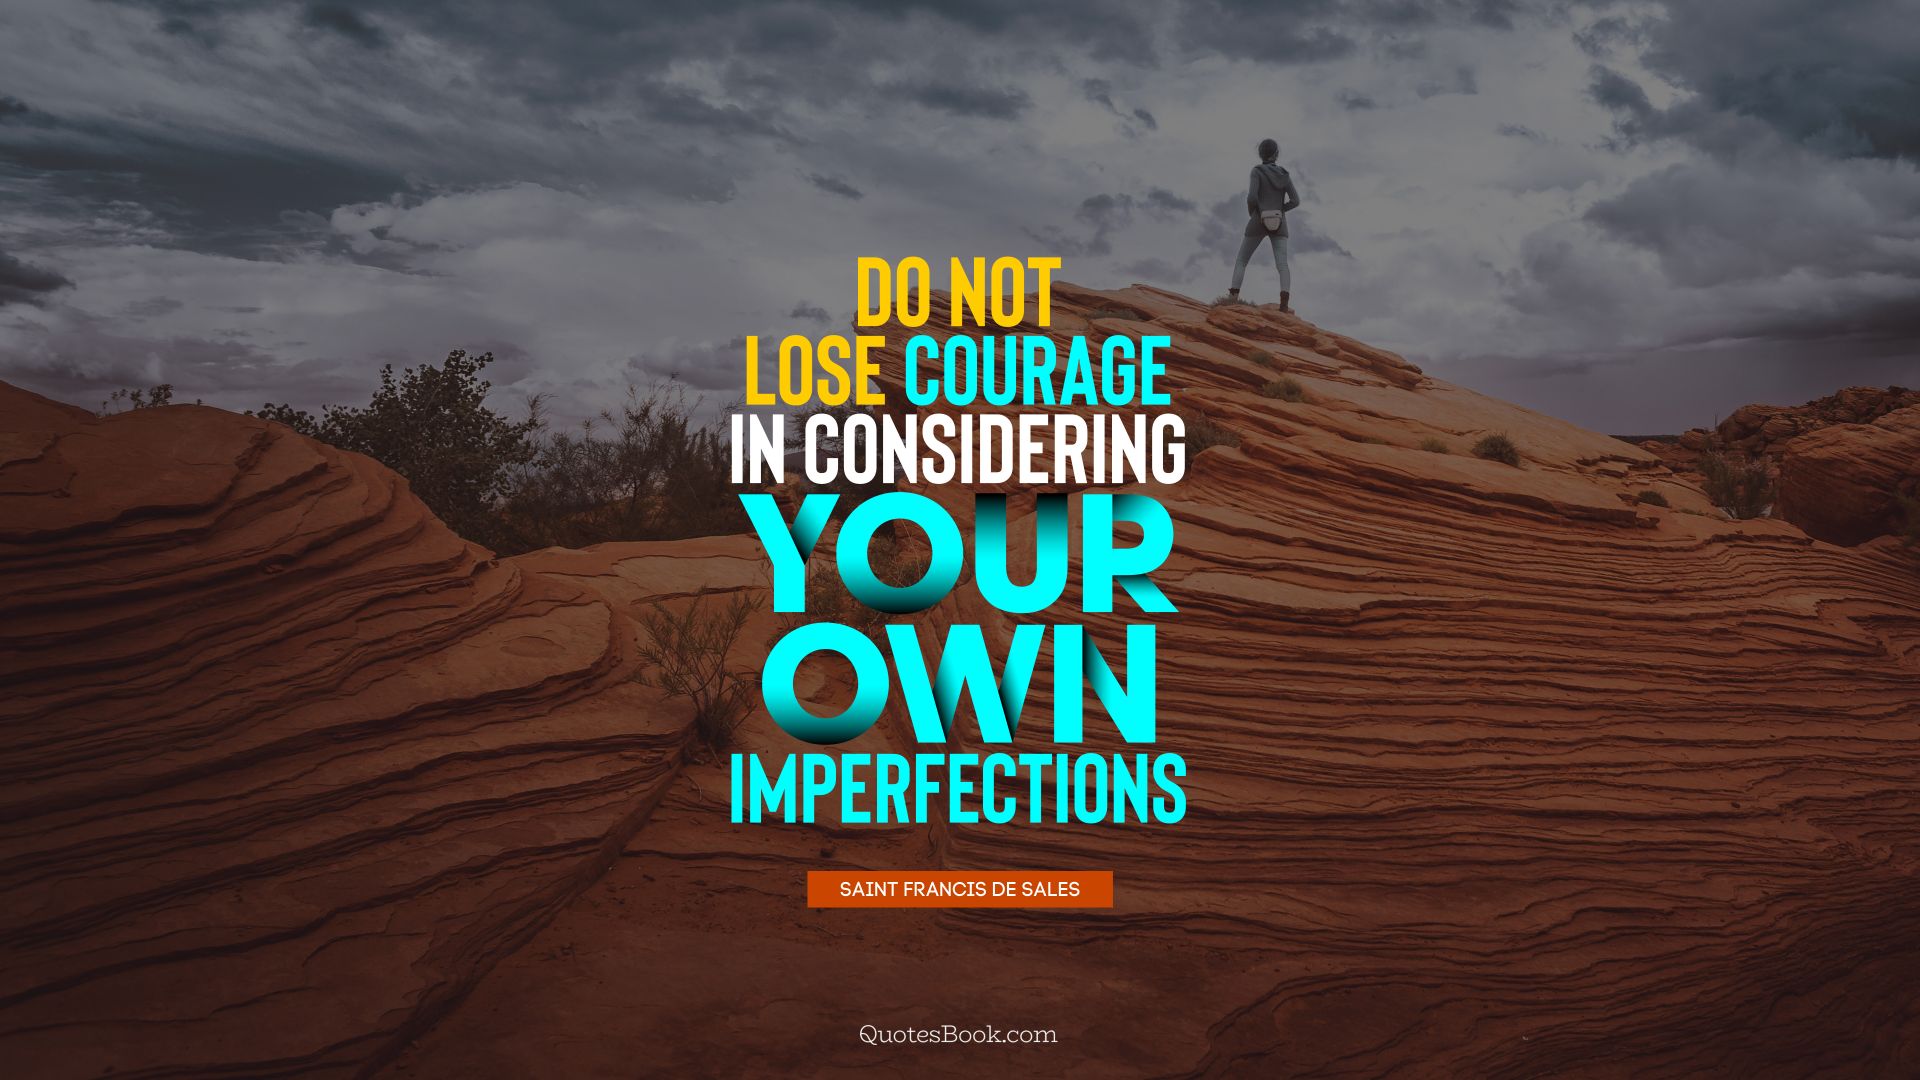 Do not lose courage in considering your own imperfections. - Quote by Saint Francis de Sales